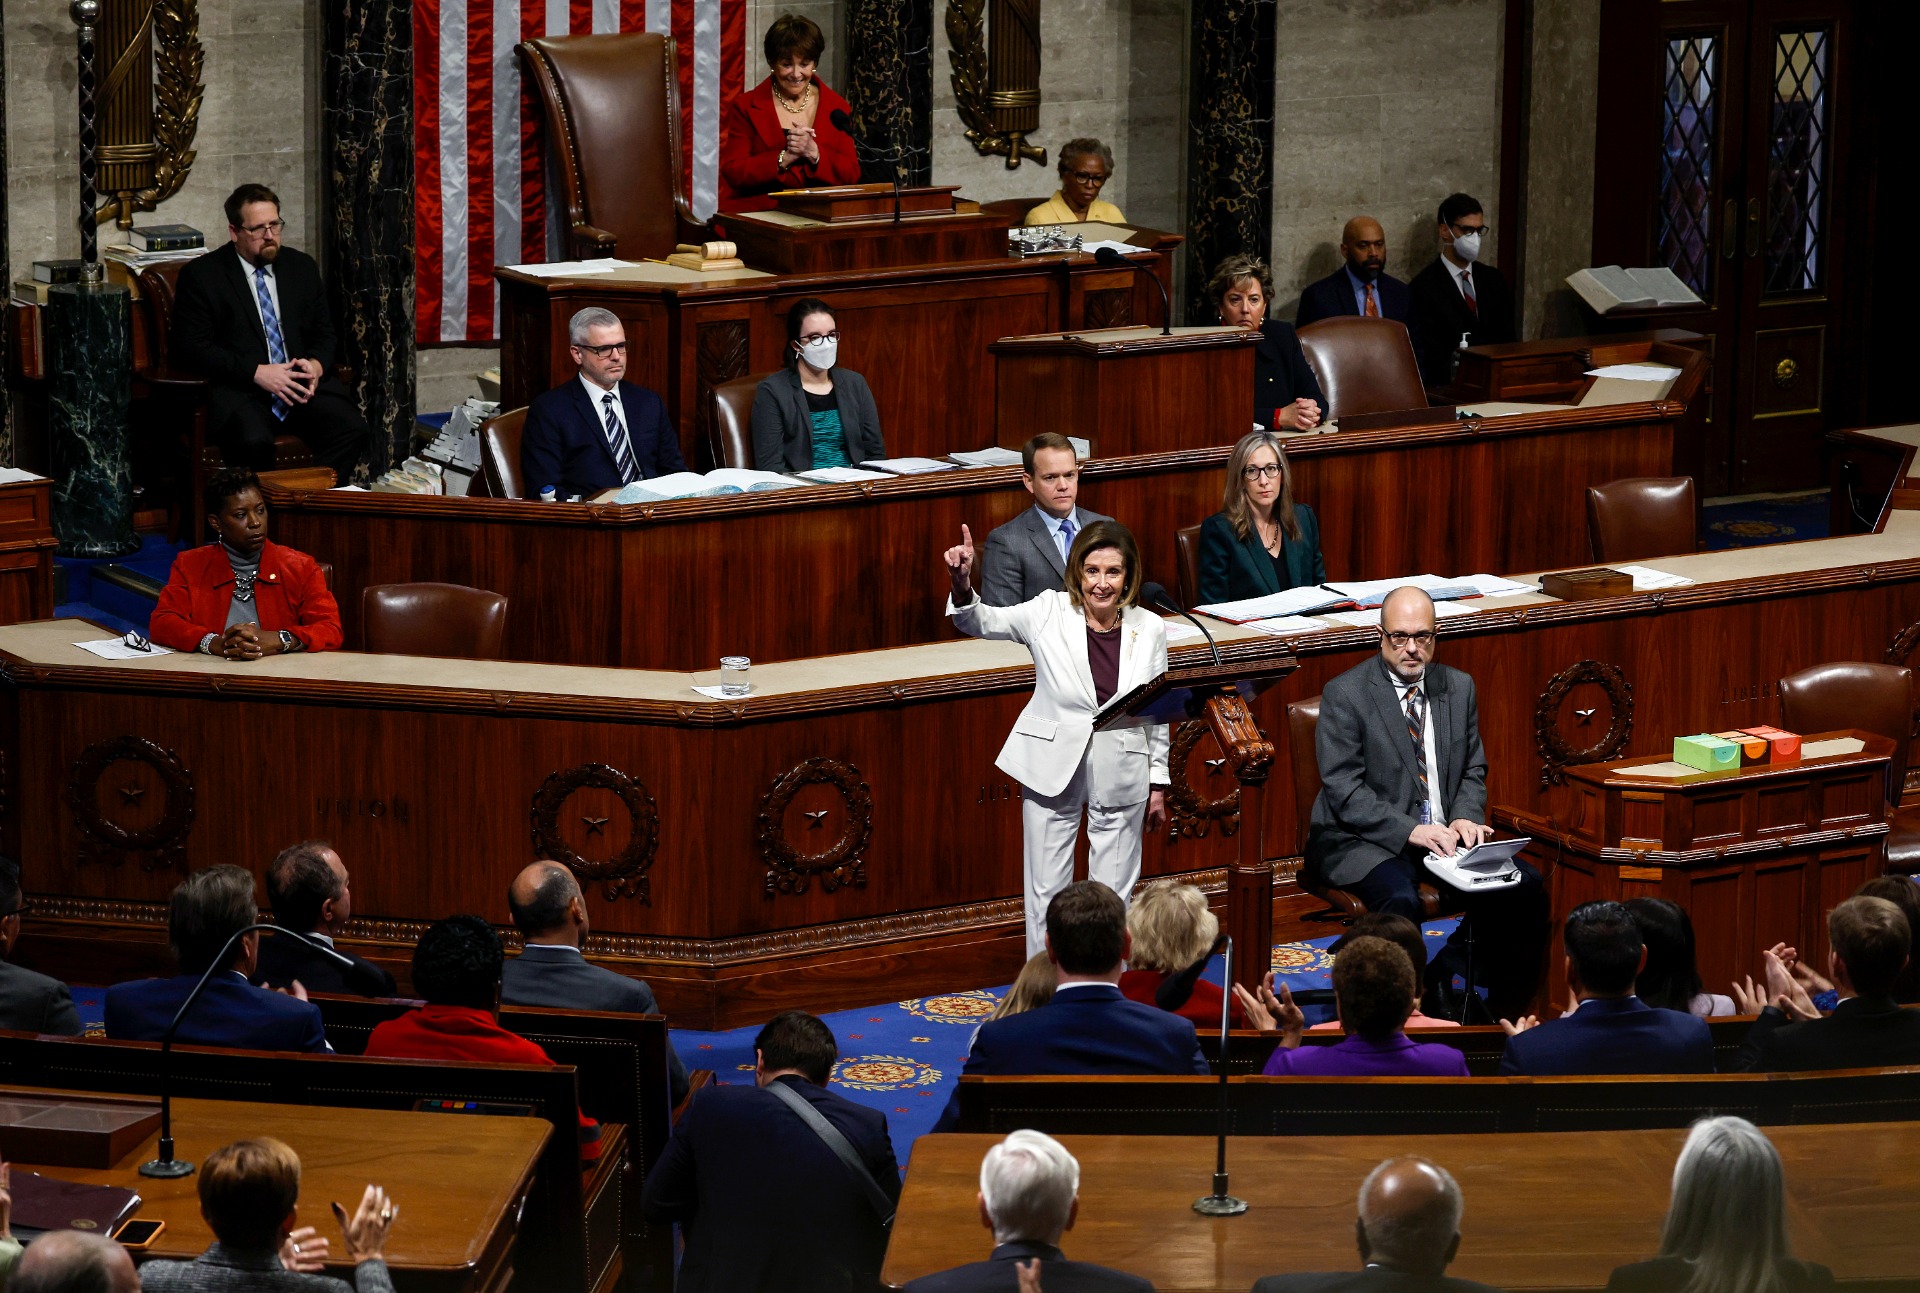 Nancy Pelosi stands on the floor of the House dressed in white, in a long shot showing her colleagues applauding her around her.